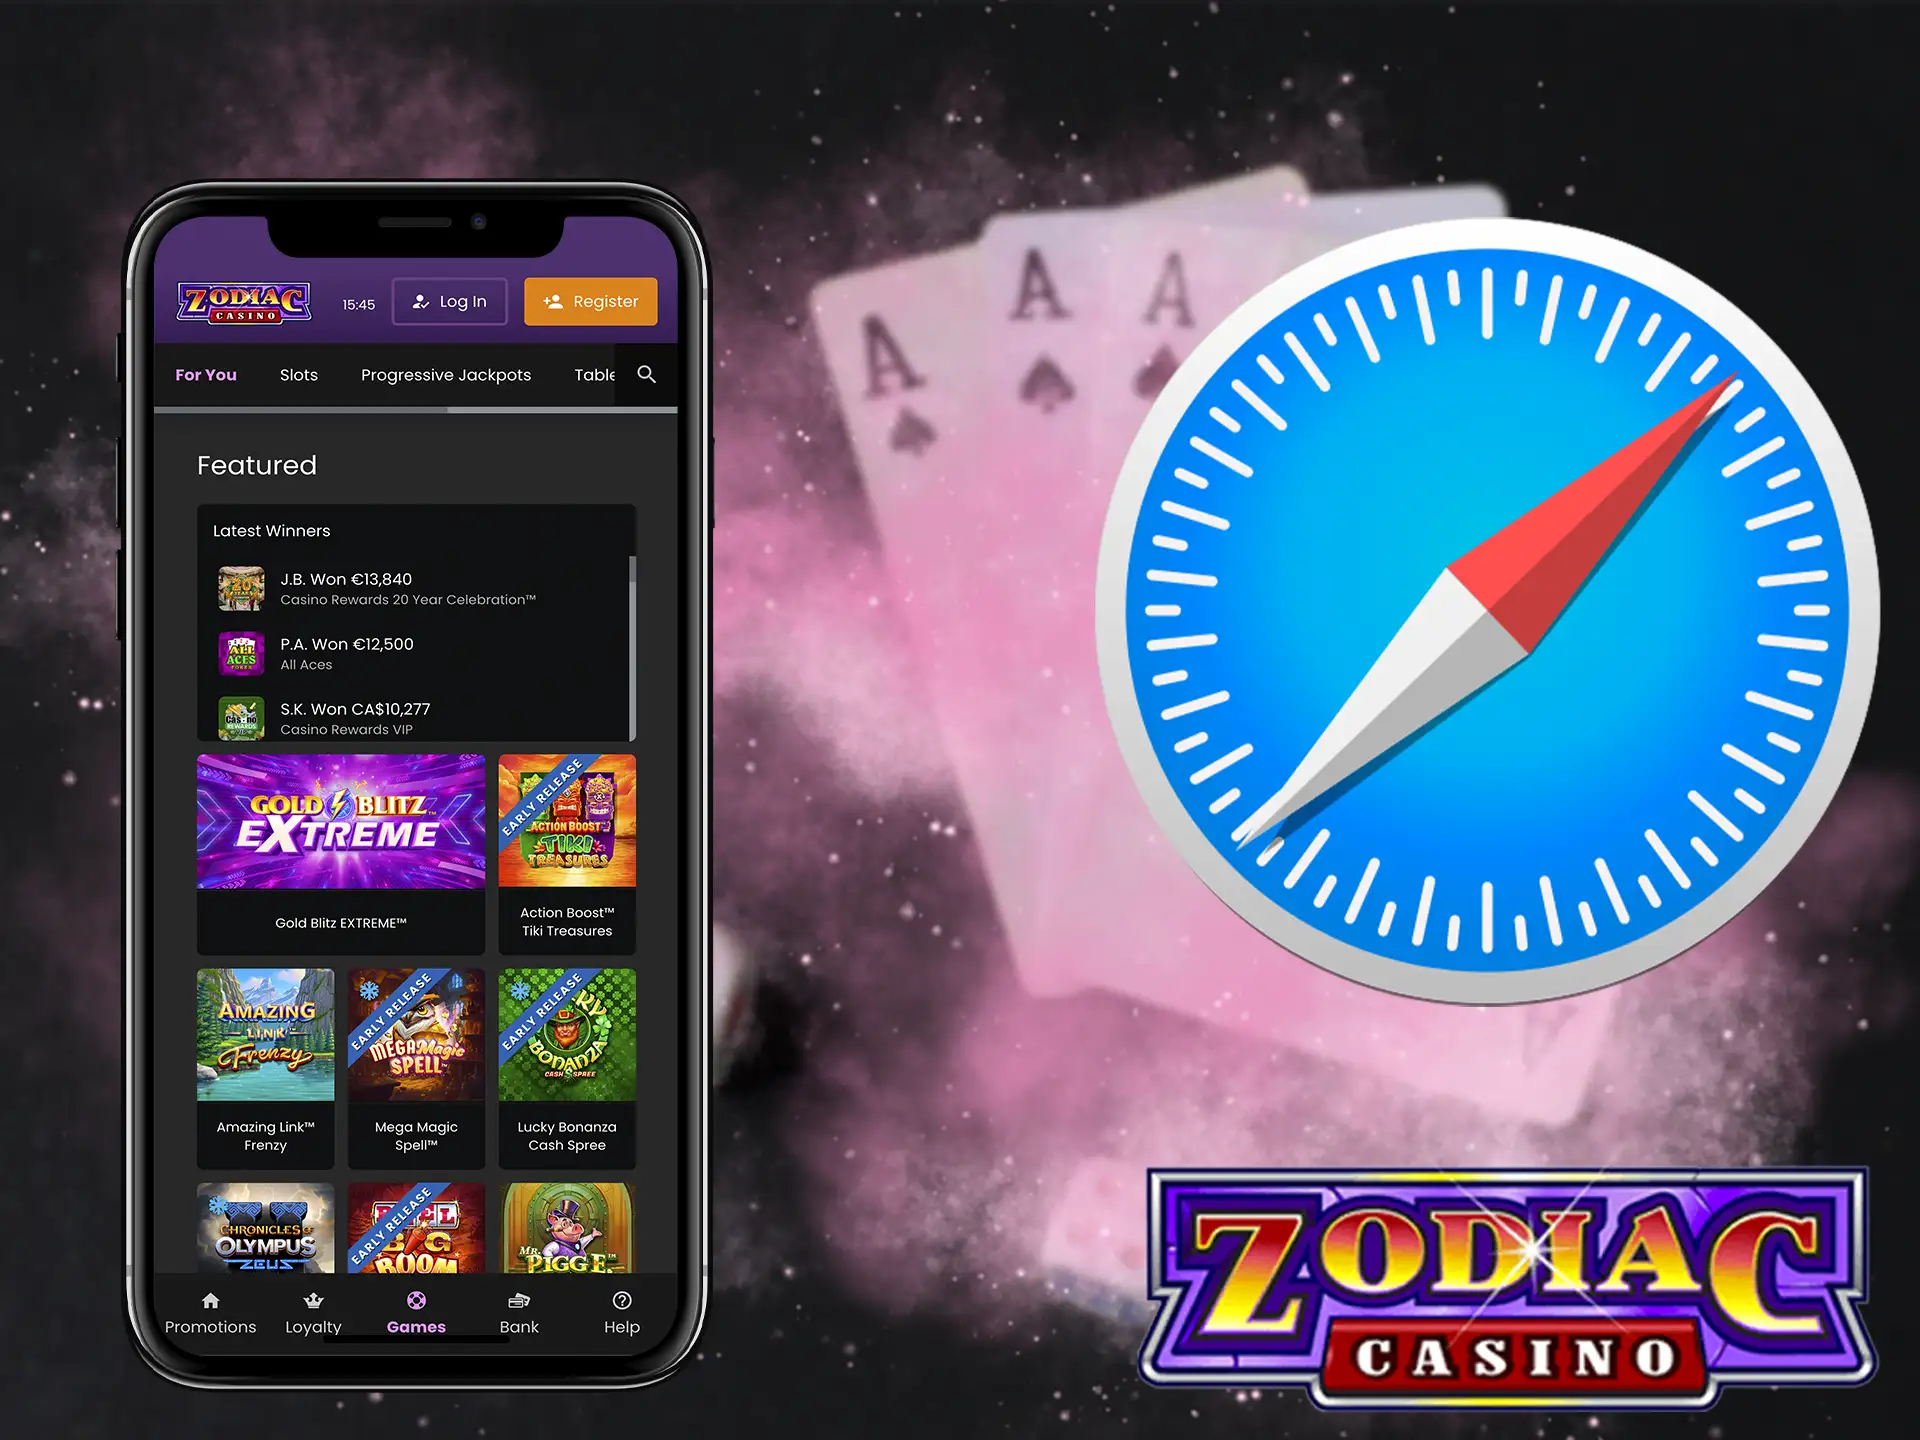 If your smartphone is not compatible with the application - this option from Zodiac Casino will help you enjoy the game.